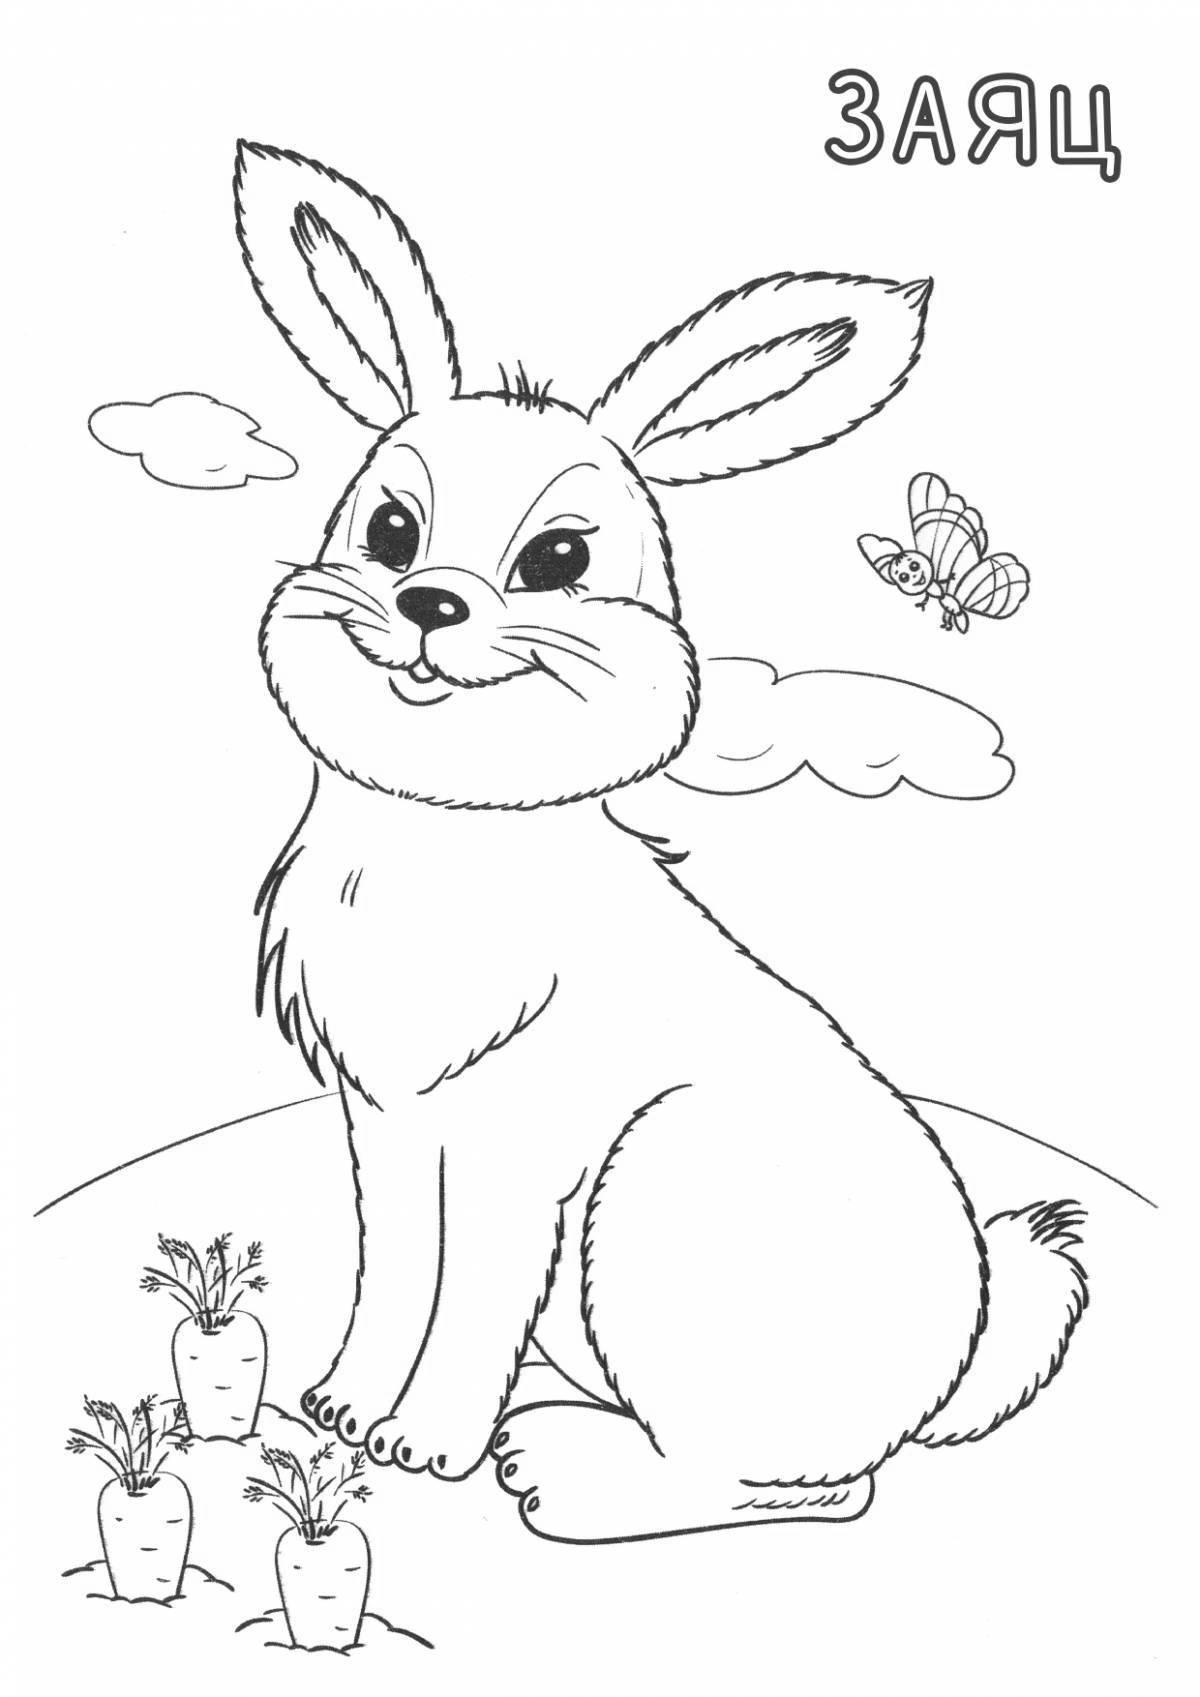 Amazing forest animal coloring pages for 6-7 year olds